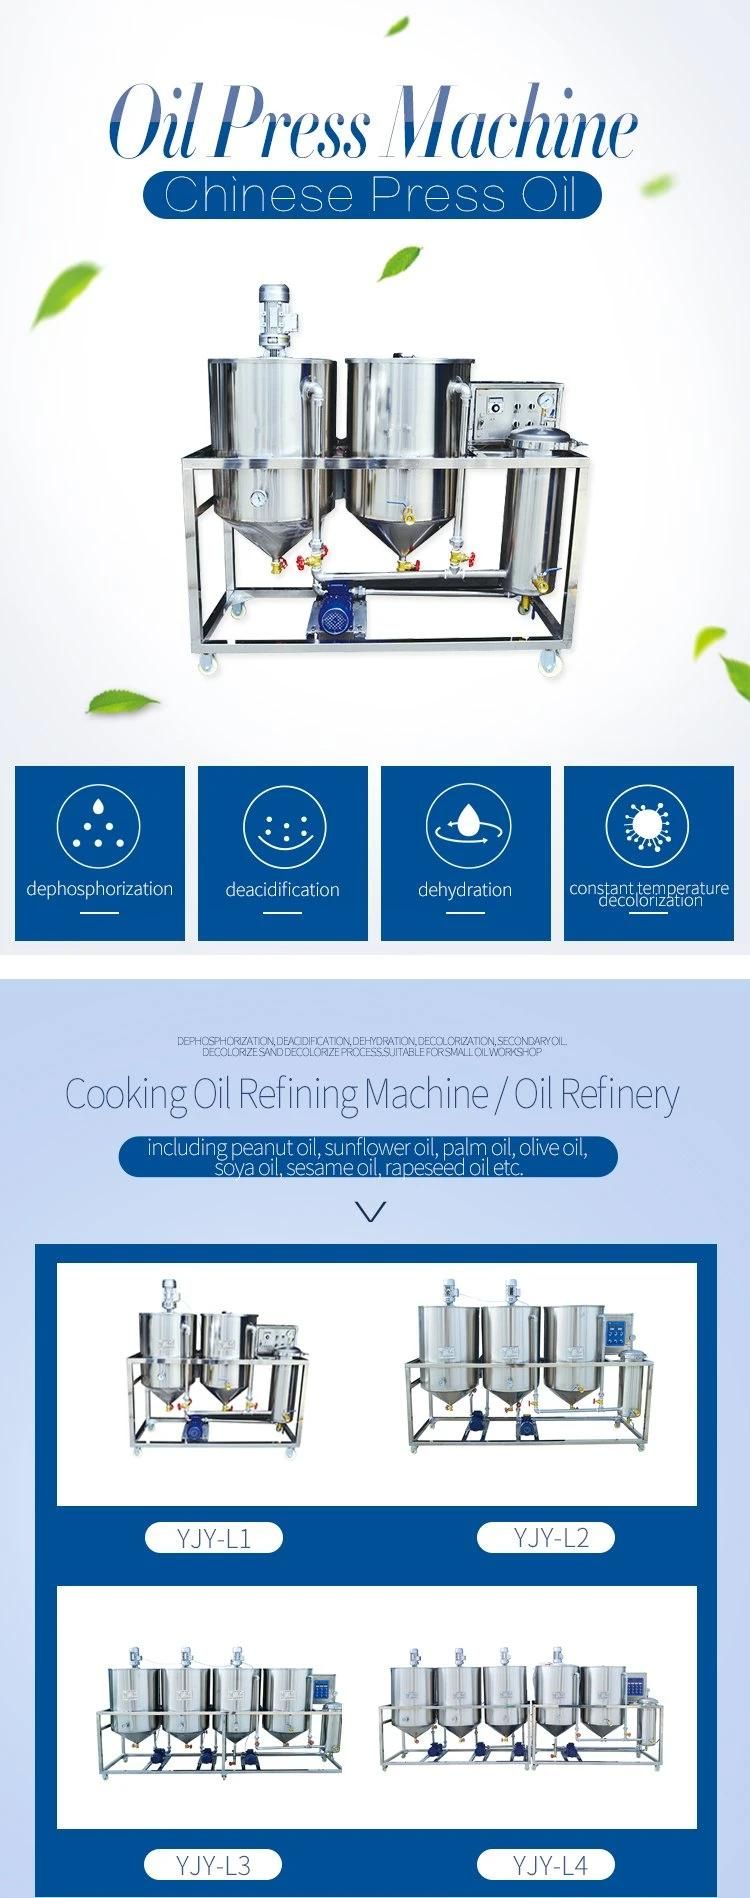 Cooking Oil Refining Machine/ Oil Refinery